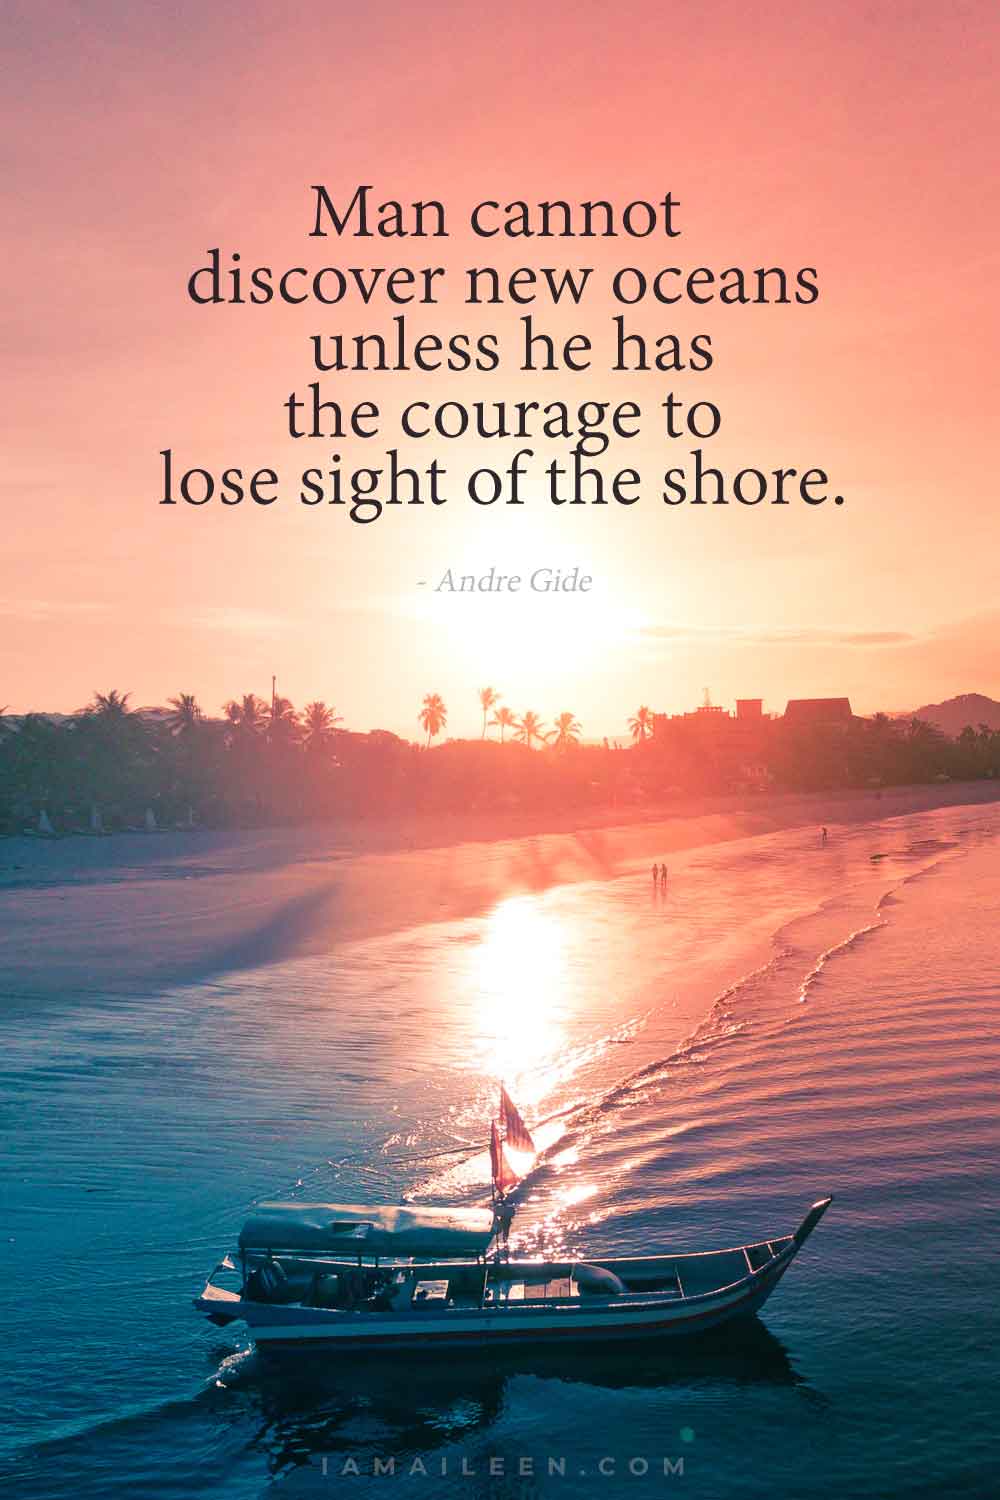 Andre Gide Quote - Lose Sight of Shore